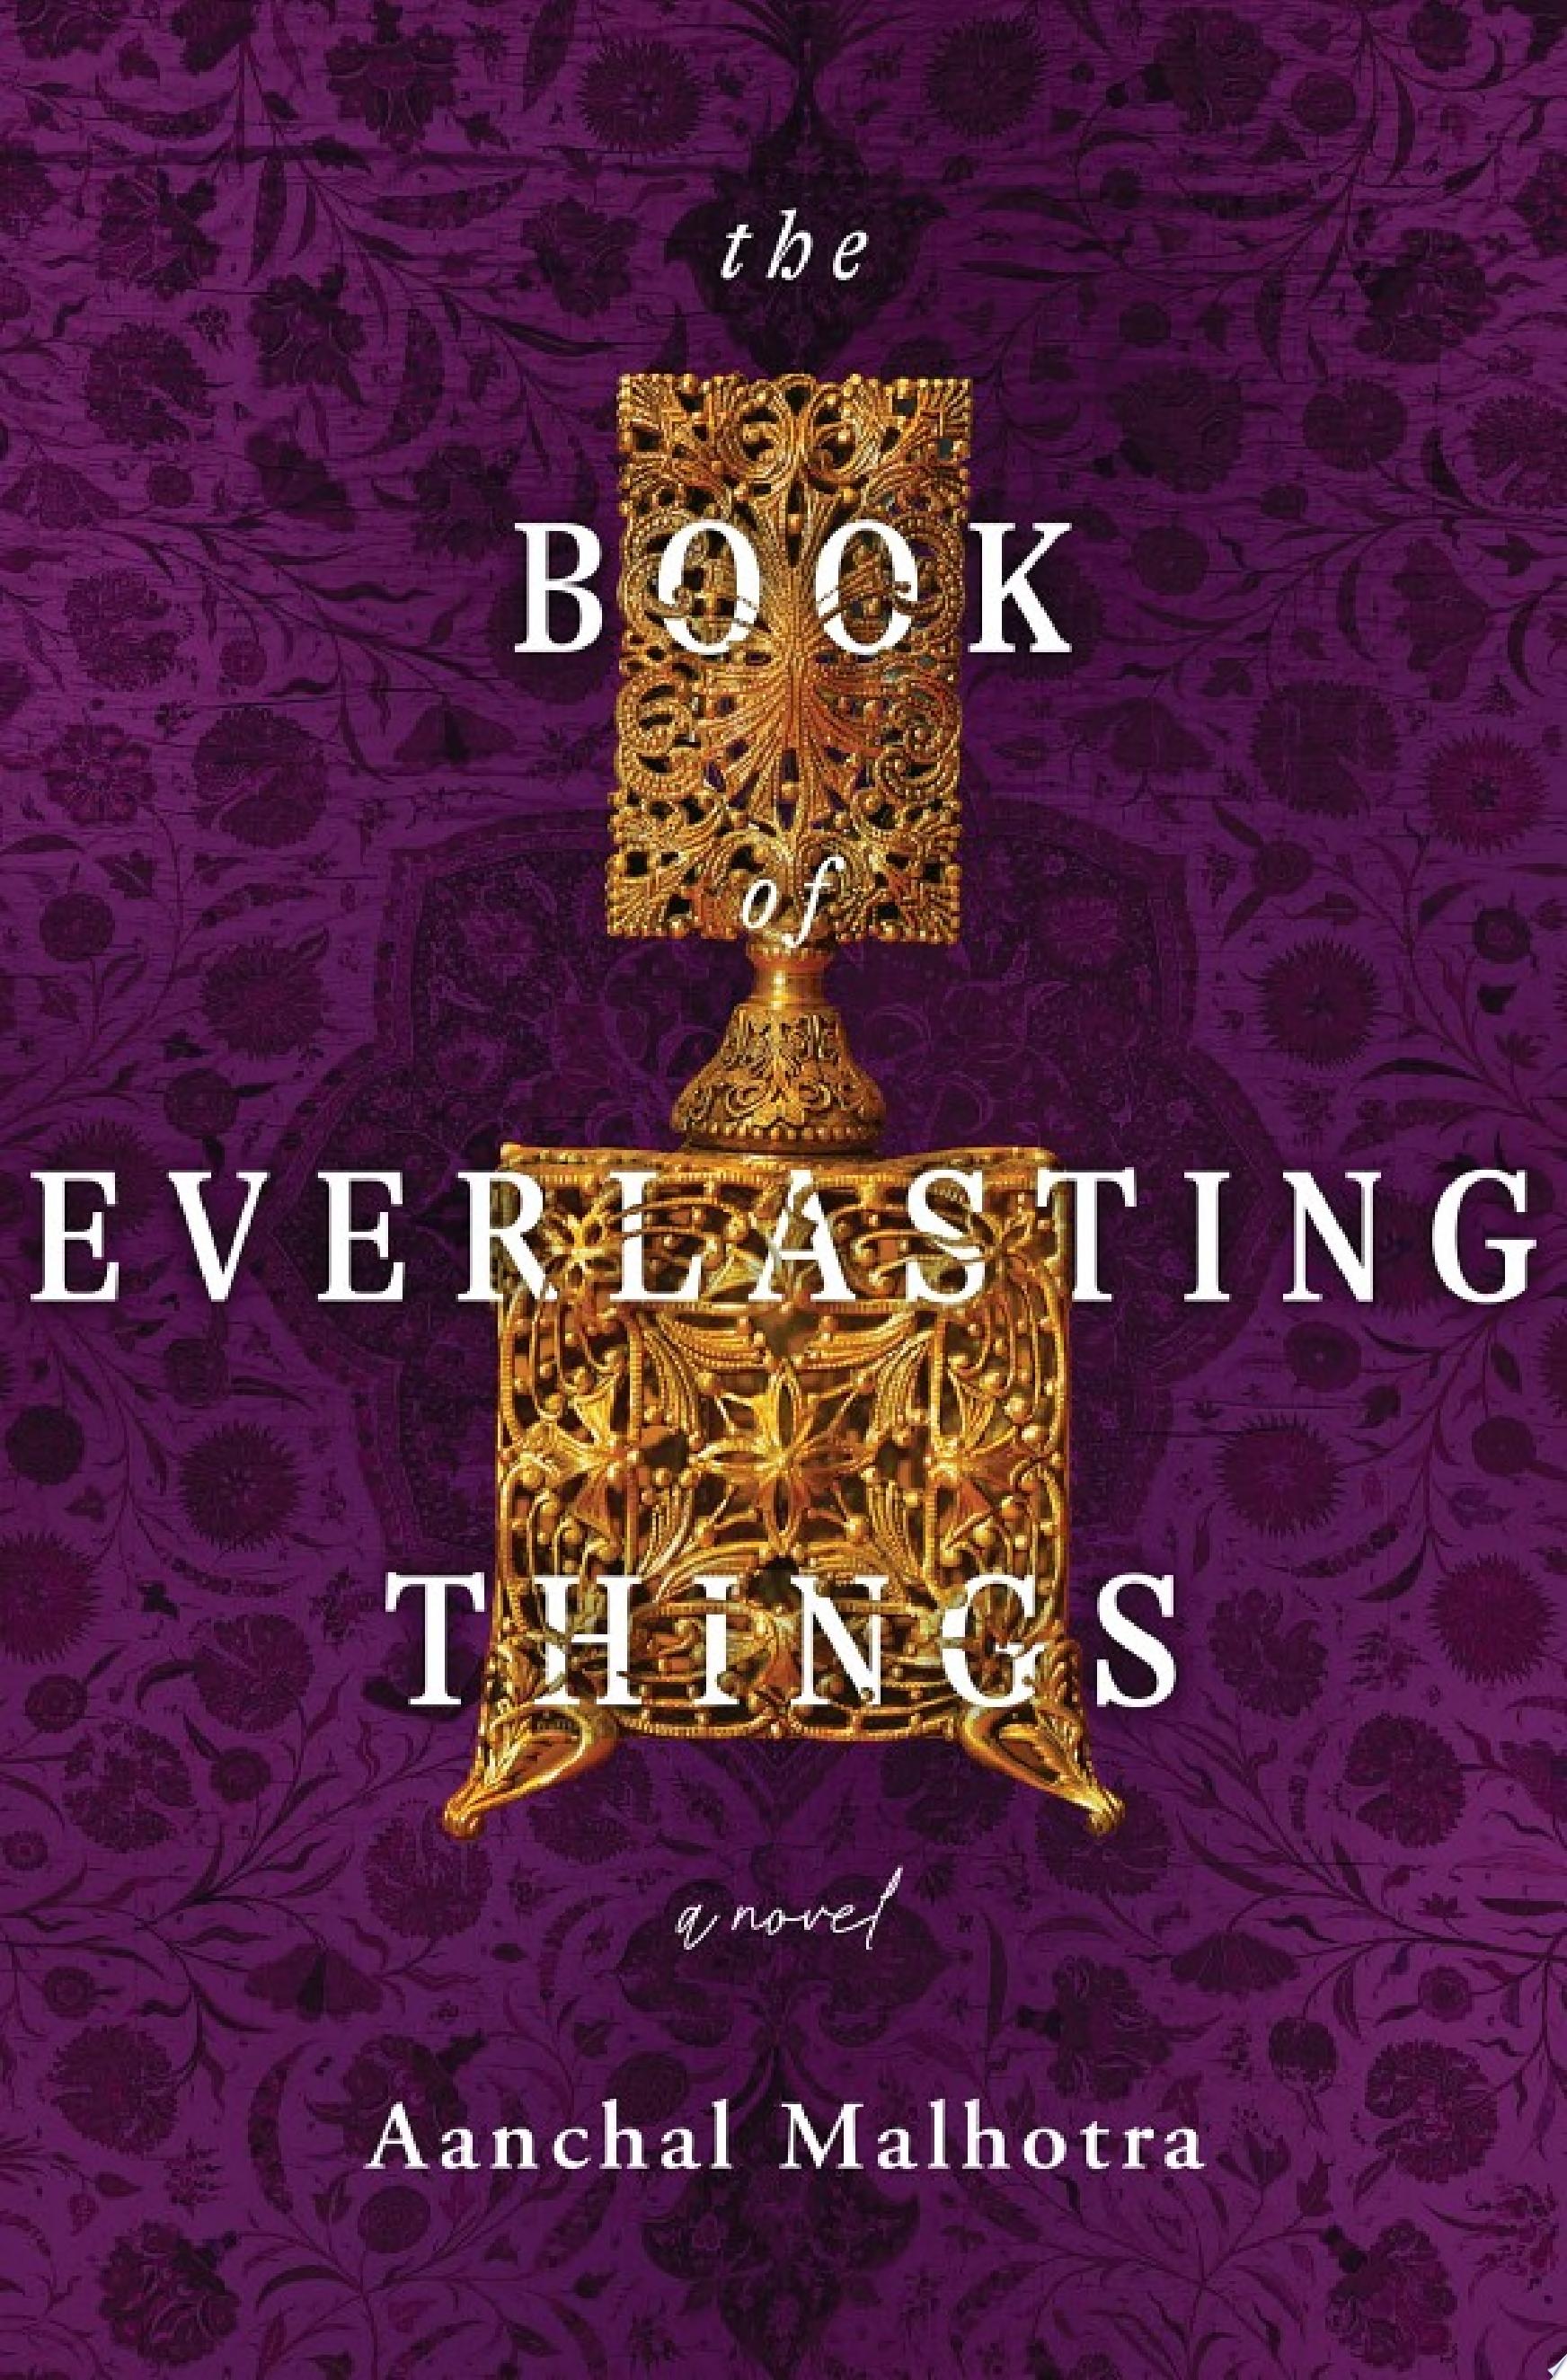 Image for "The Book of Everlasting Things"